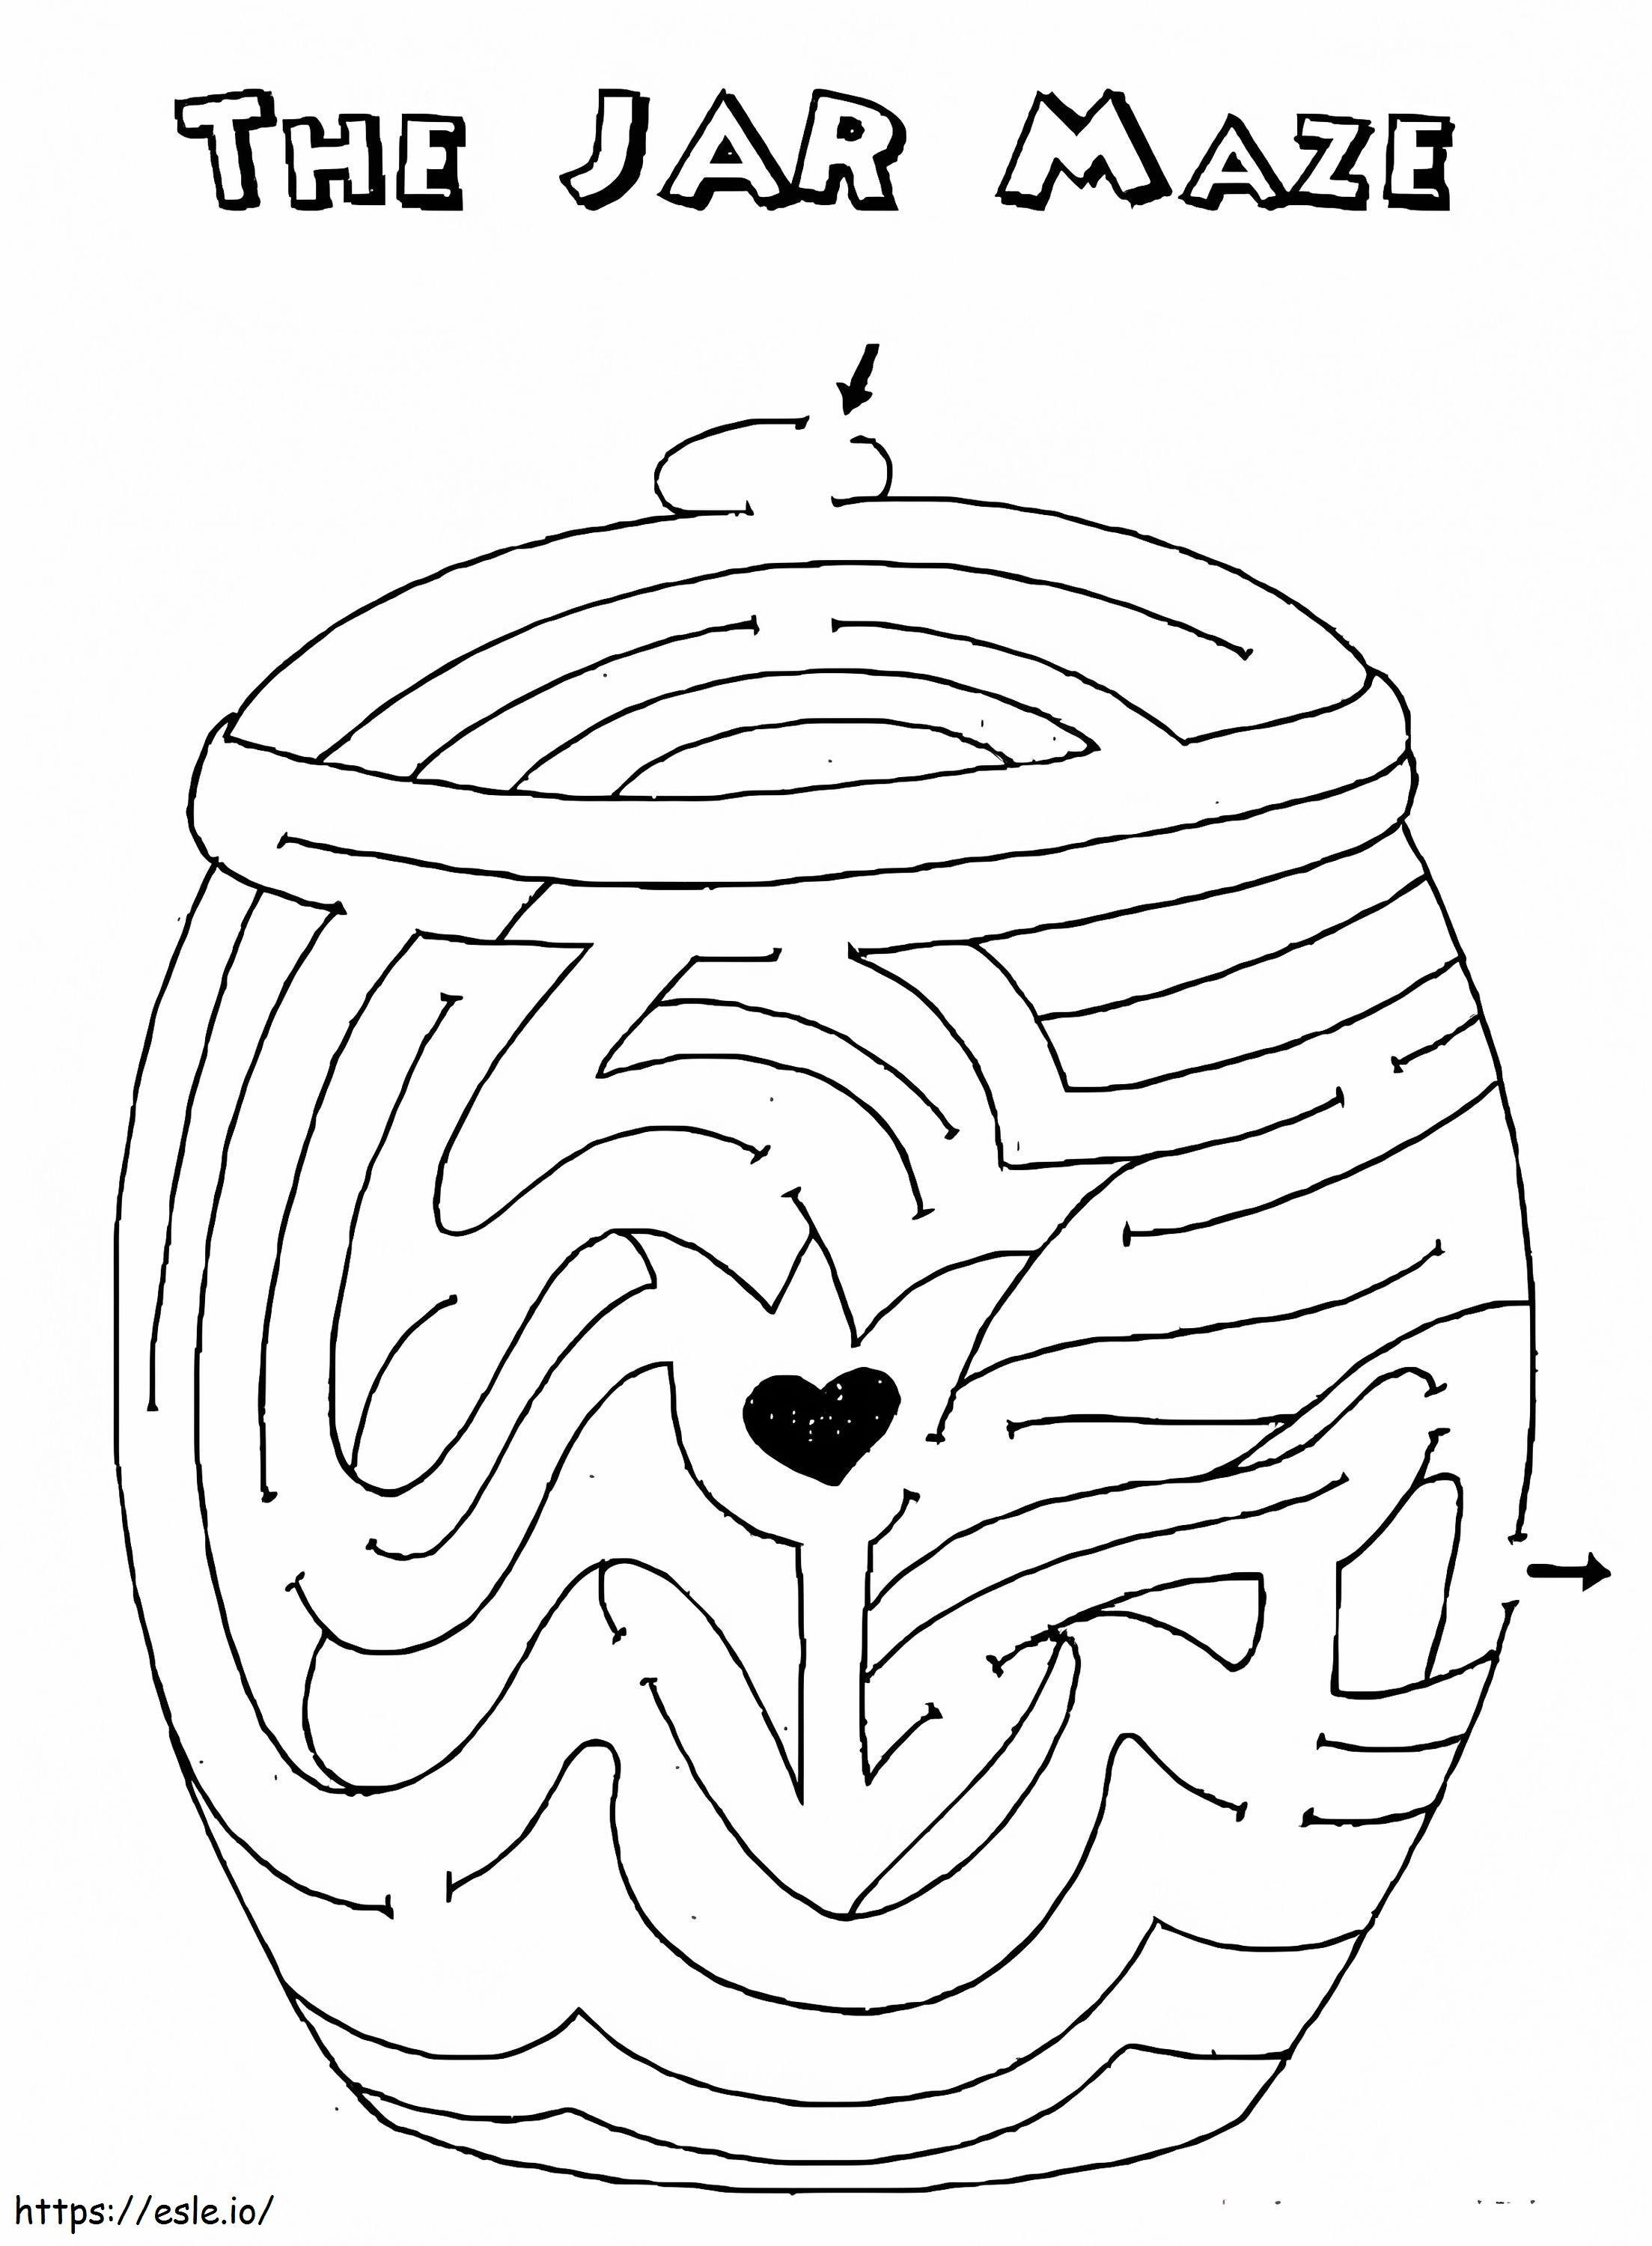 The Jar Maze coloring page